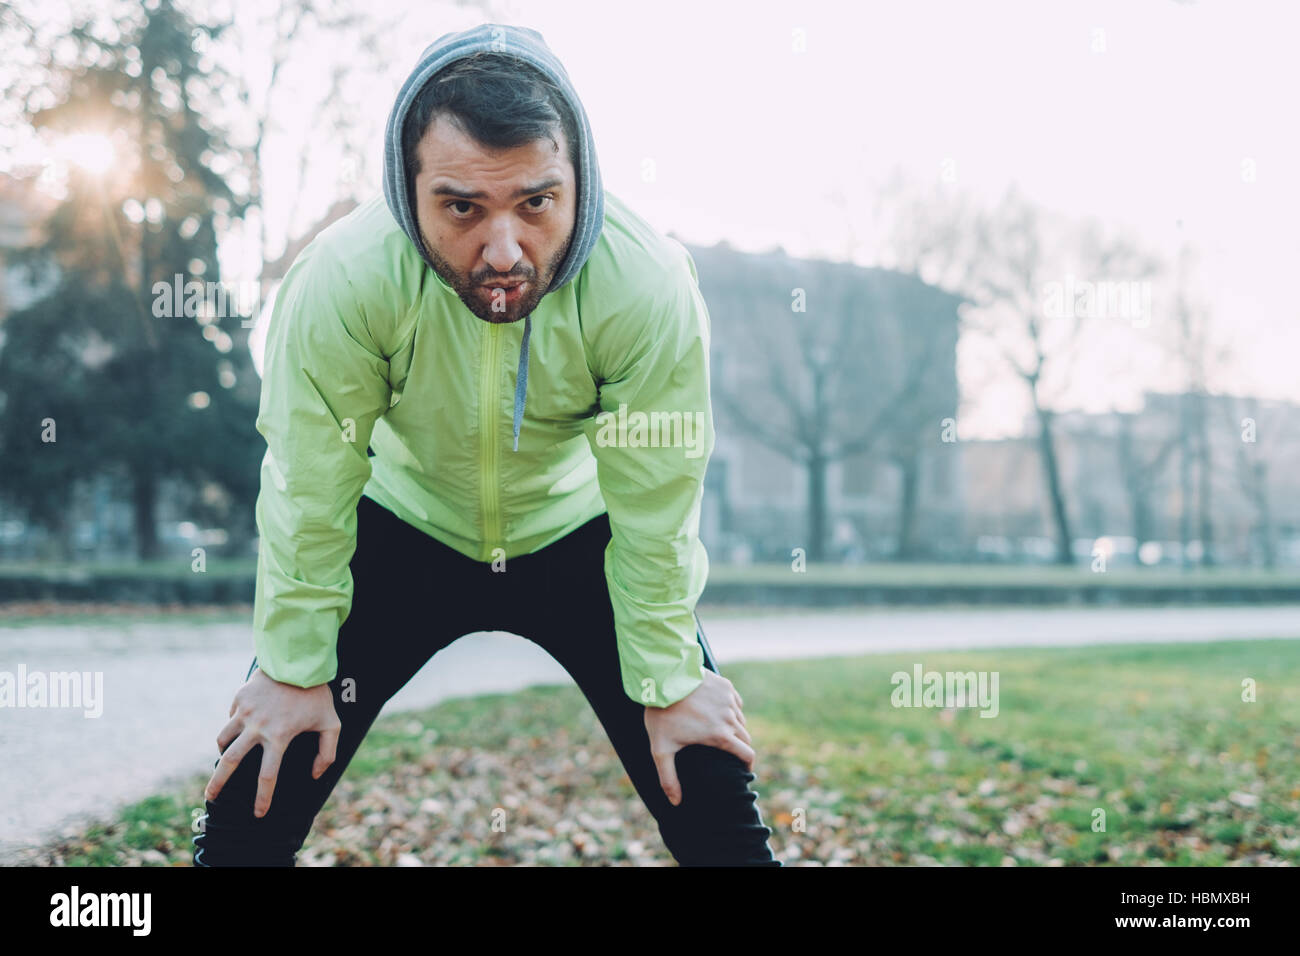 Man working out in the city park in cold weather Stock Photo